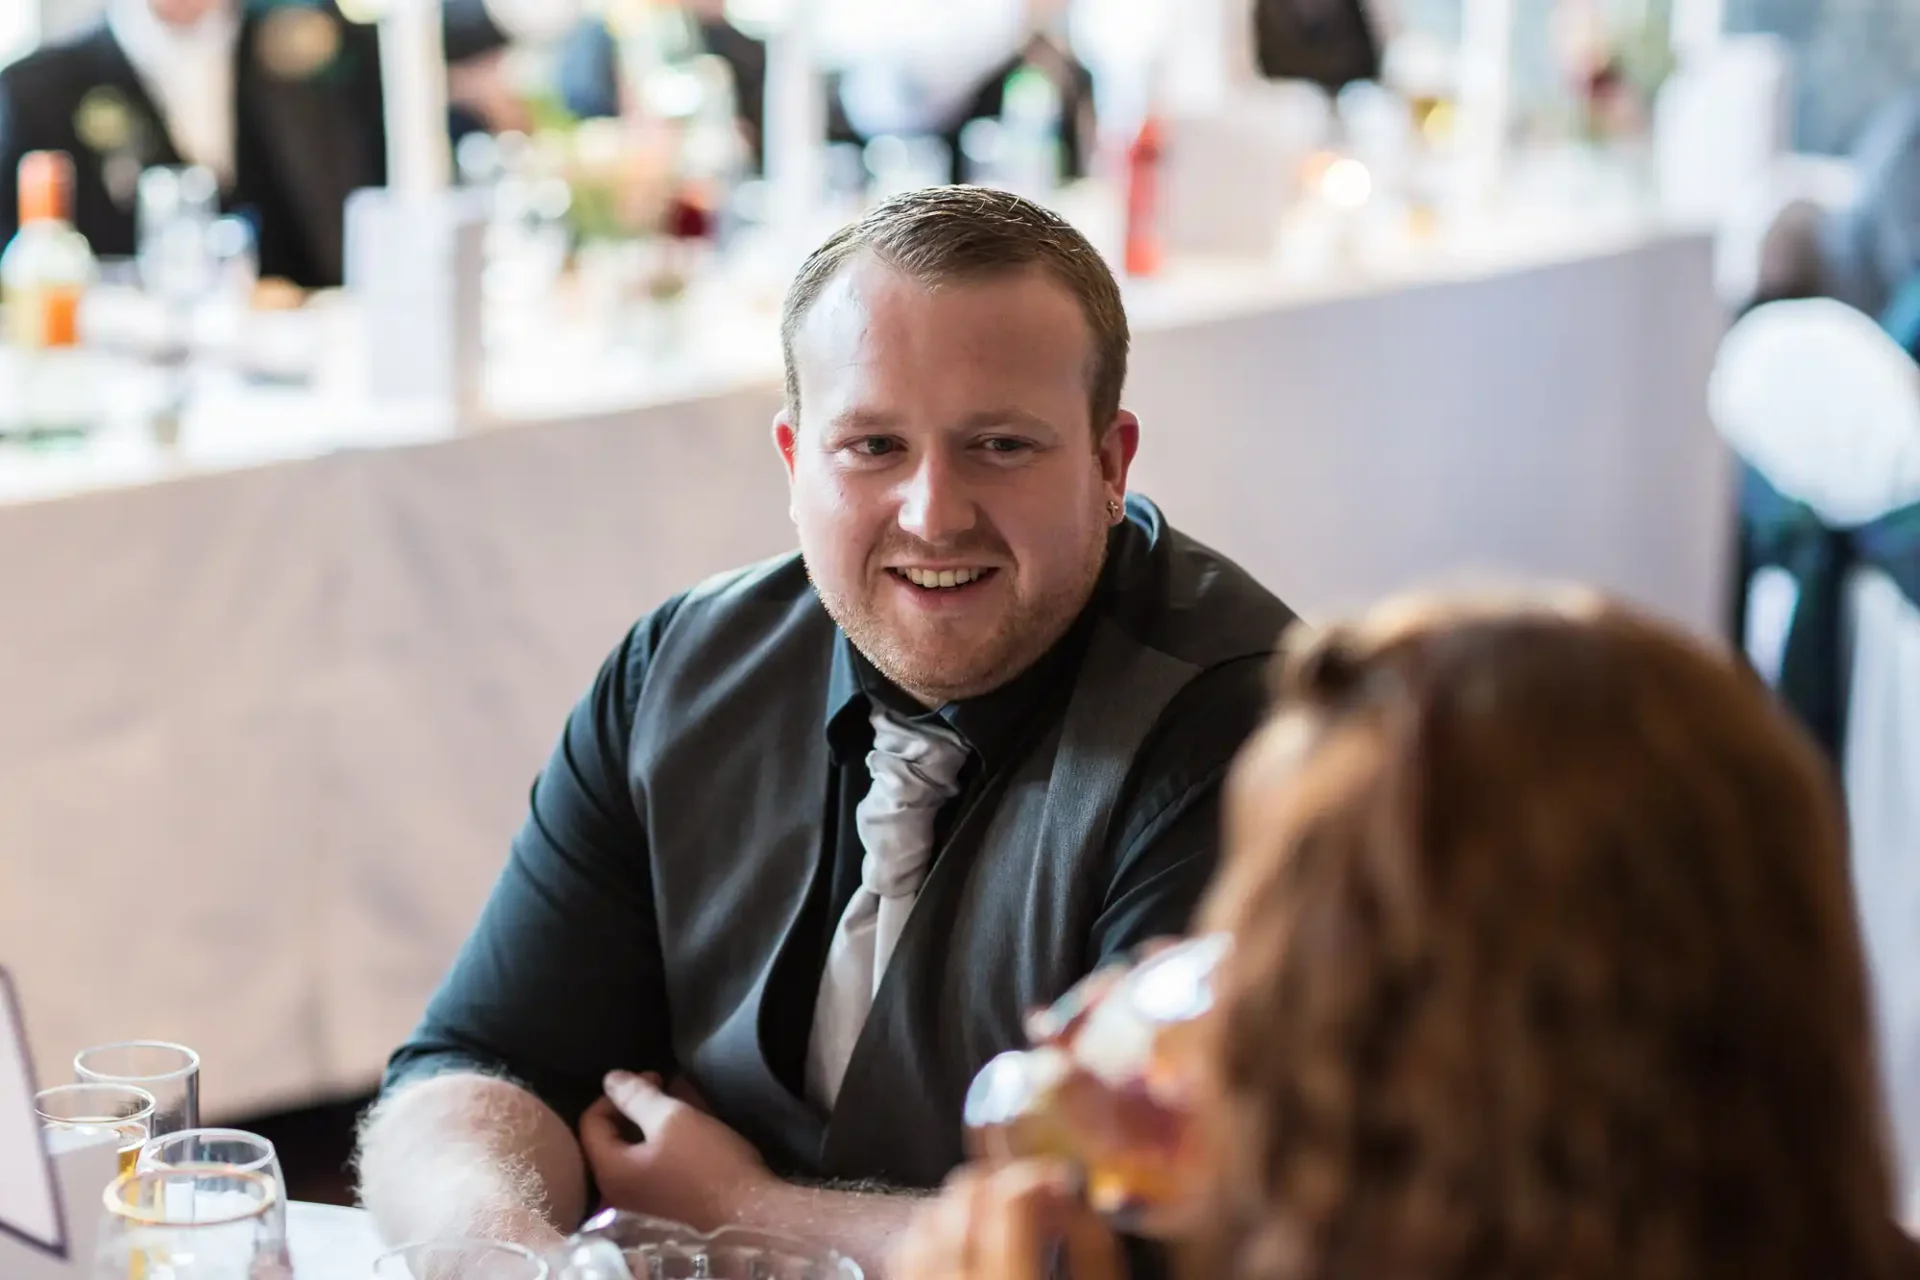 A man in a formal suit smiling at a table during an event, with blurred people and glasses in the background.